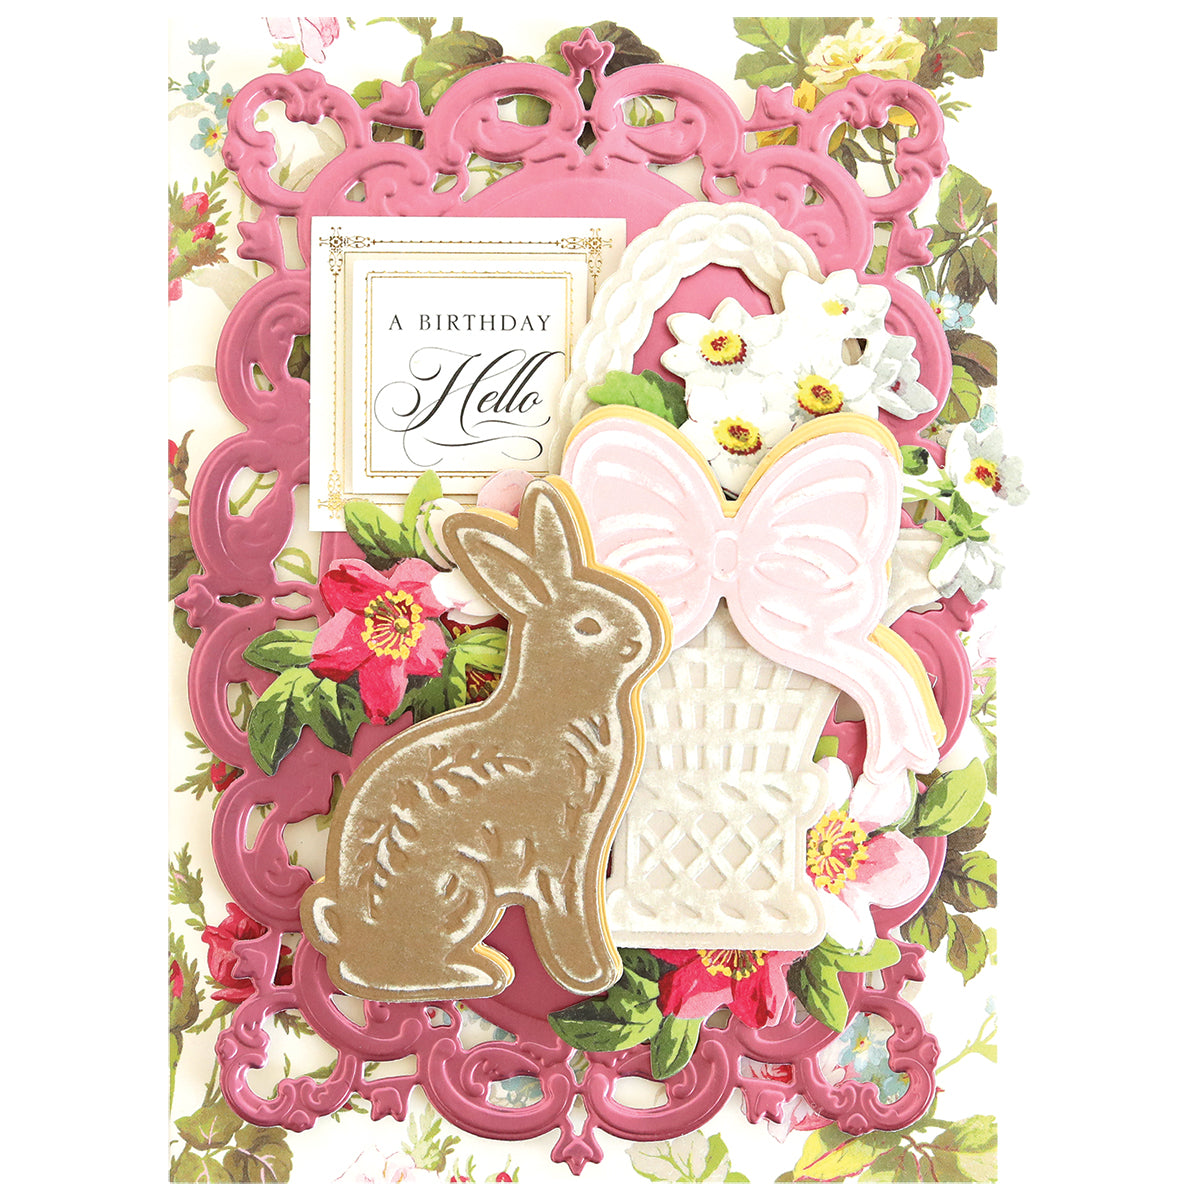 a birthday card with a bunny and a basket of flowers.